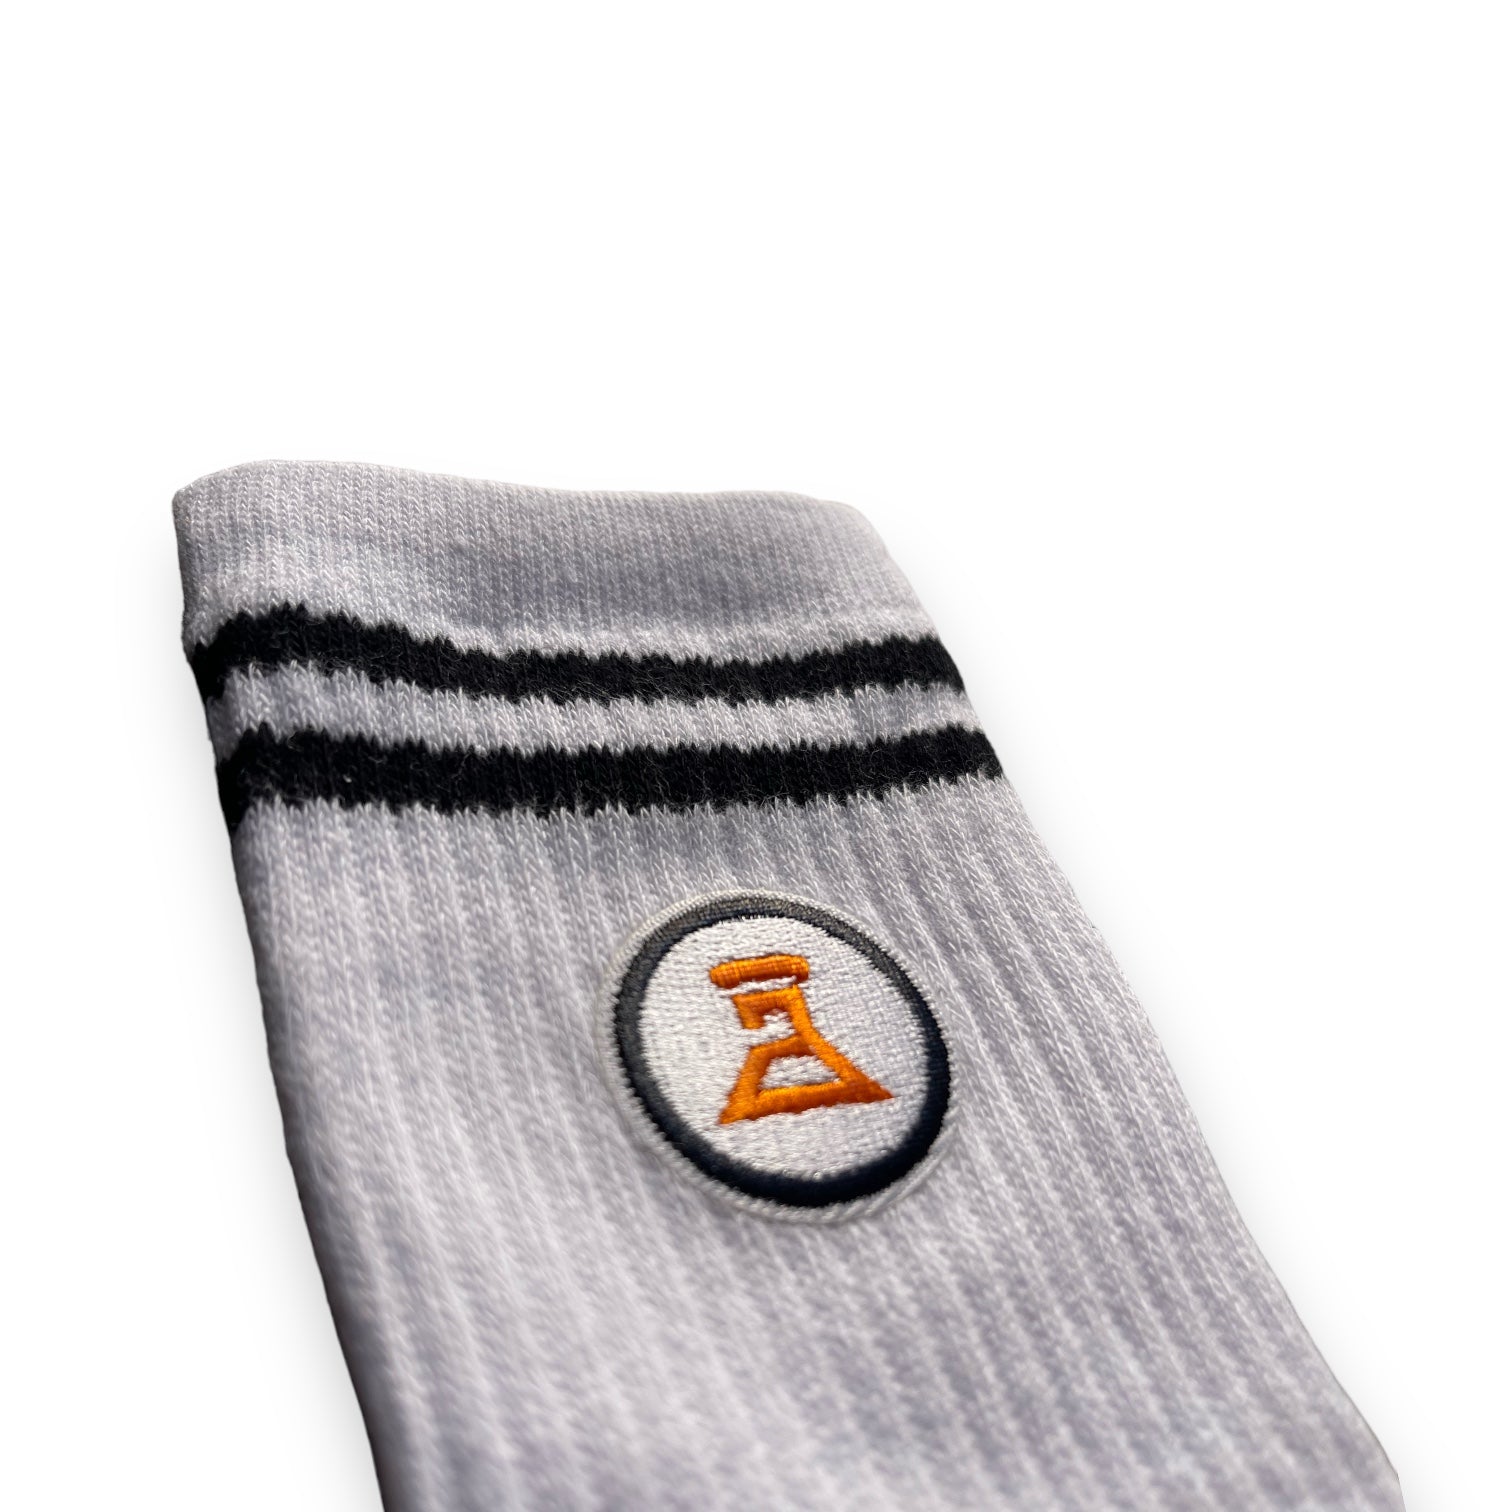 Dlab Socks (High) white qith Black lines and Embroidered Patch